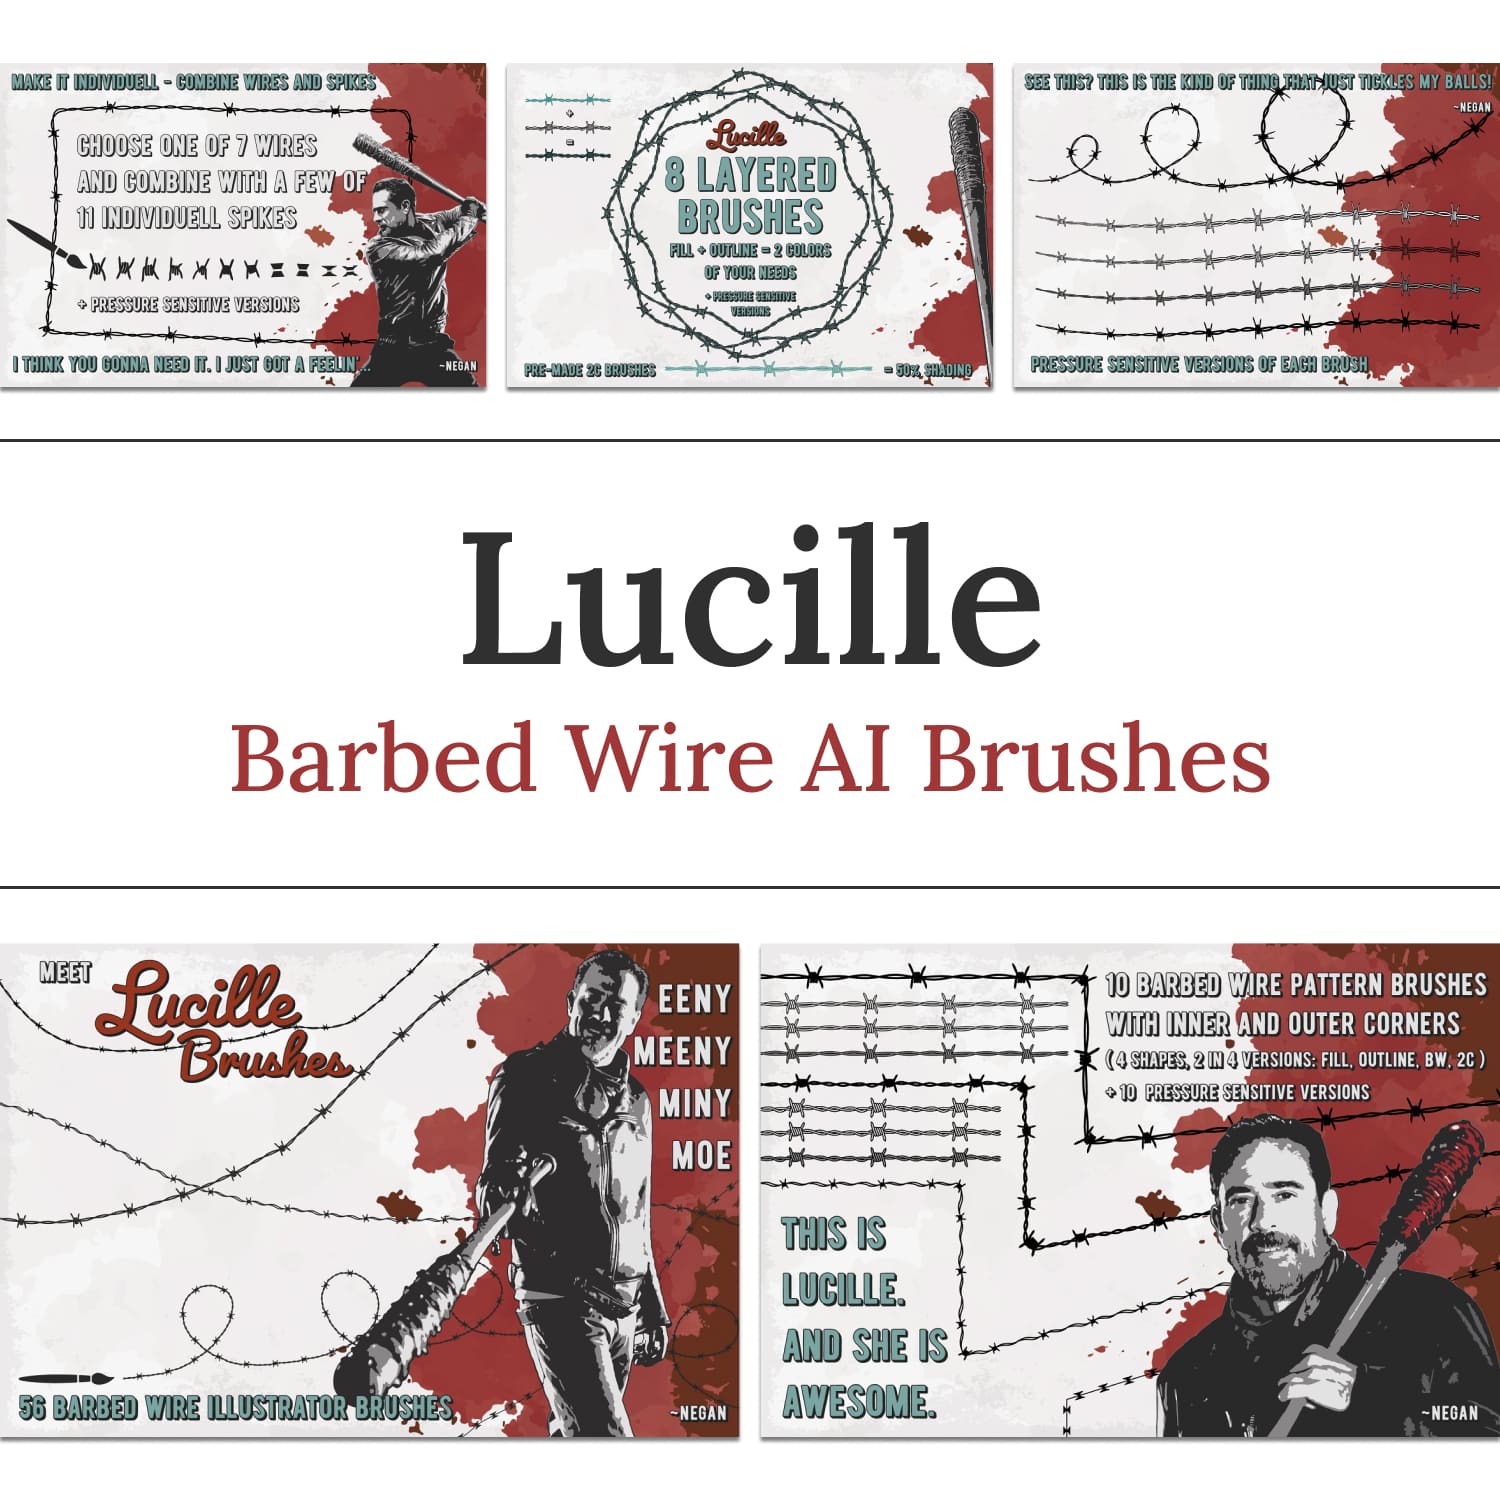 Lucille - Barbed Wire AI Brushes.